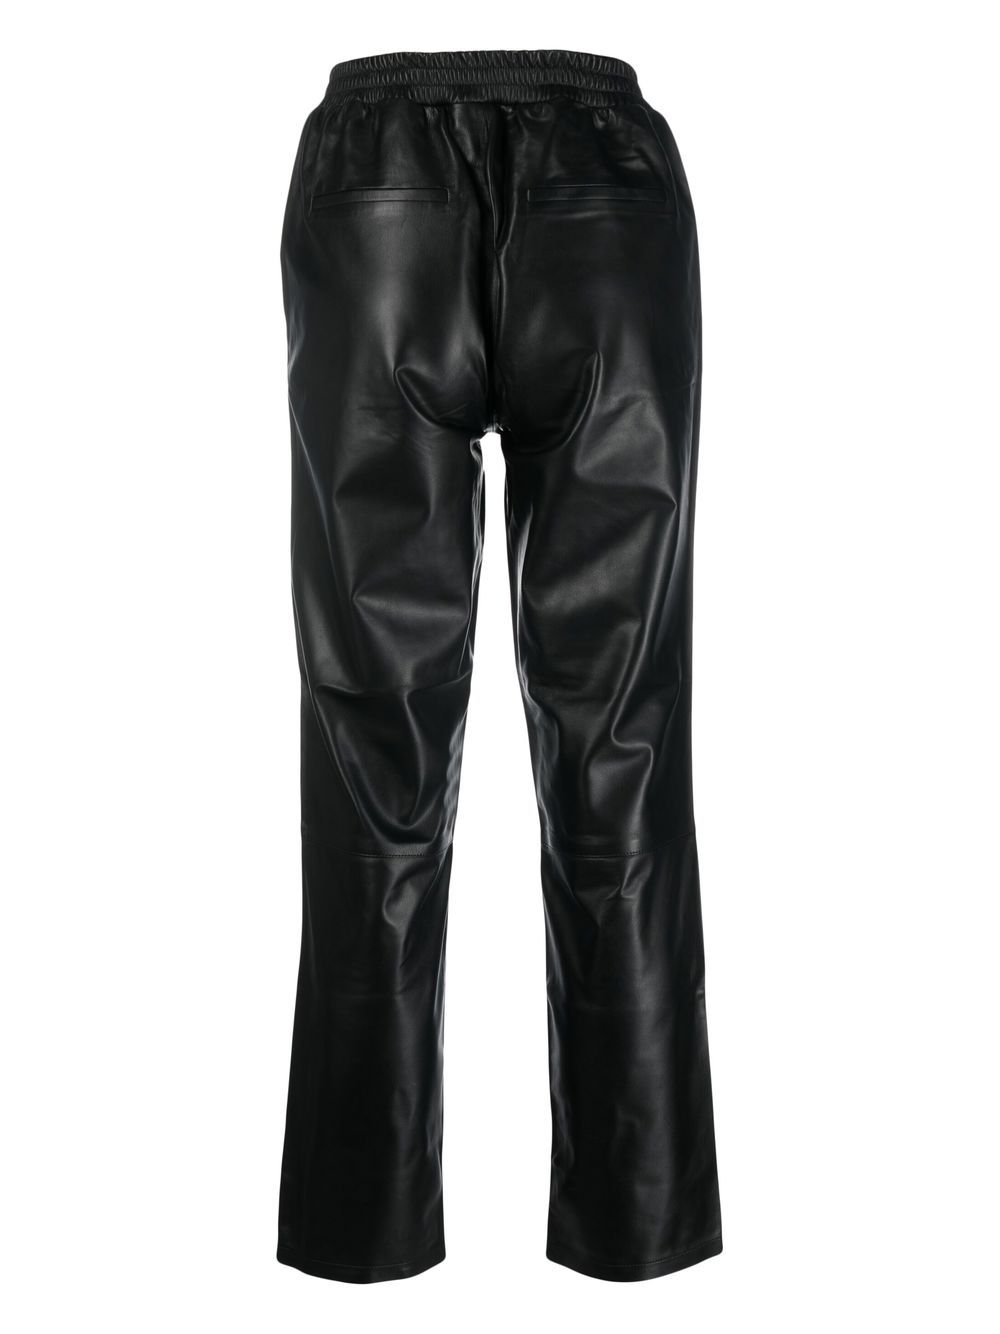 Incentive! Cashmere Elasticated Leather Trousers - Farfetch